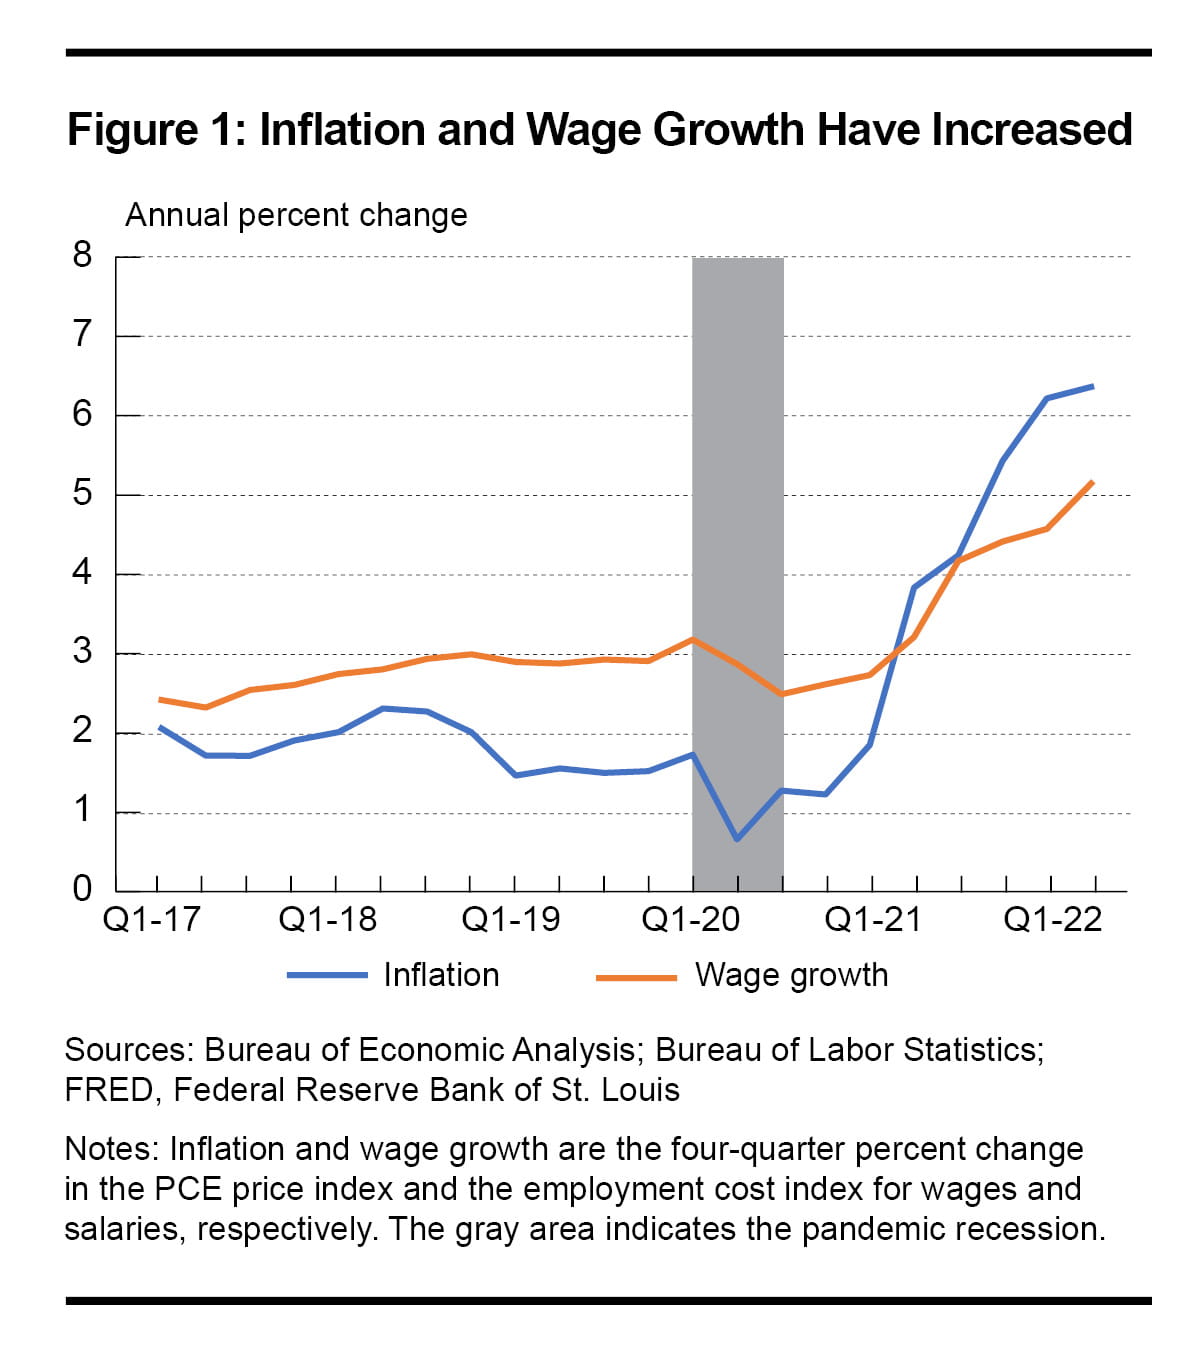 Figure 1: Inflation and Wage Growth Have Increased